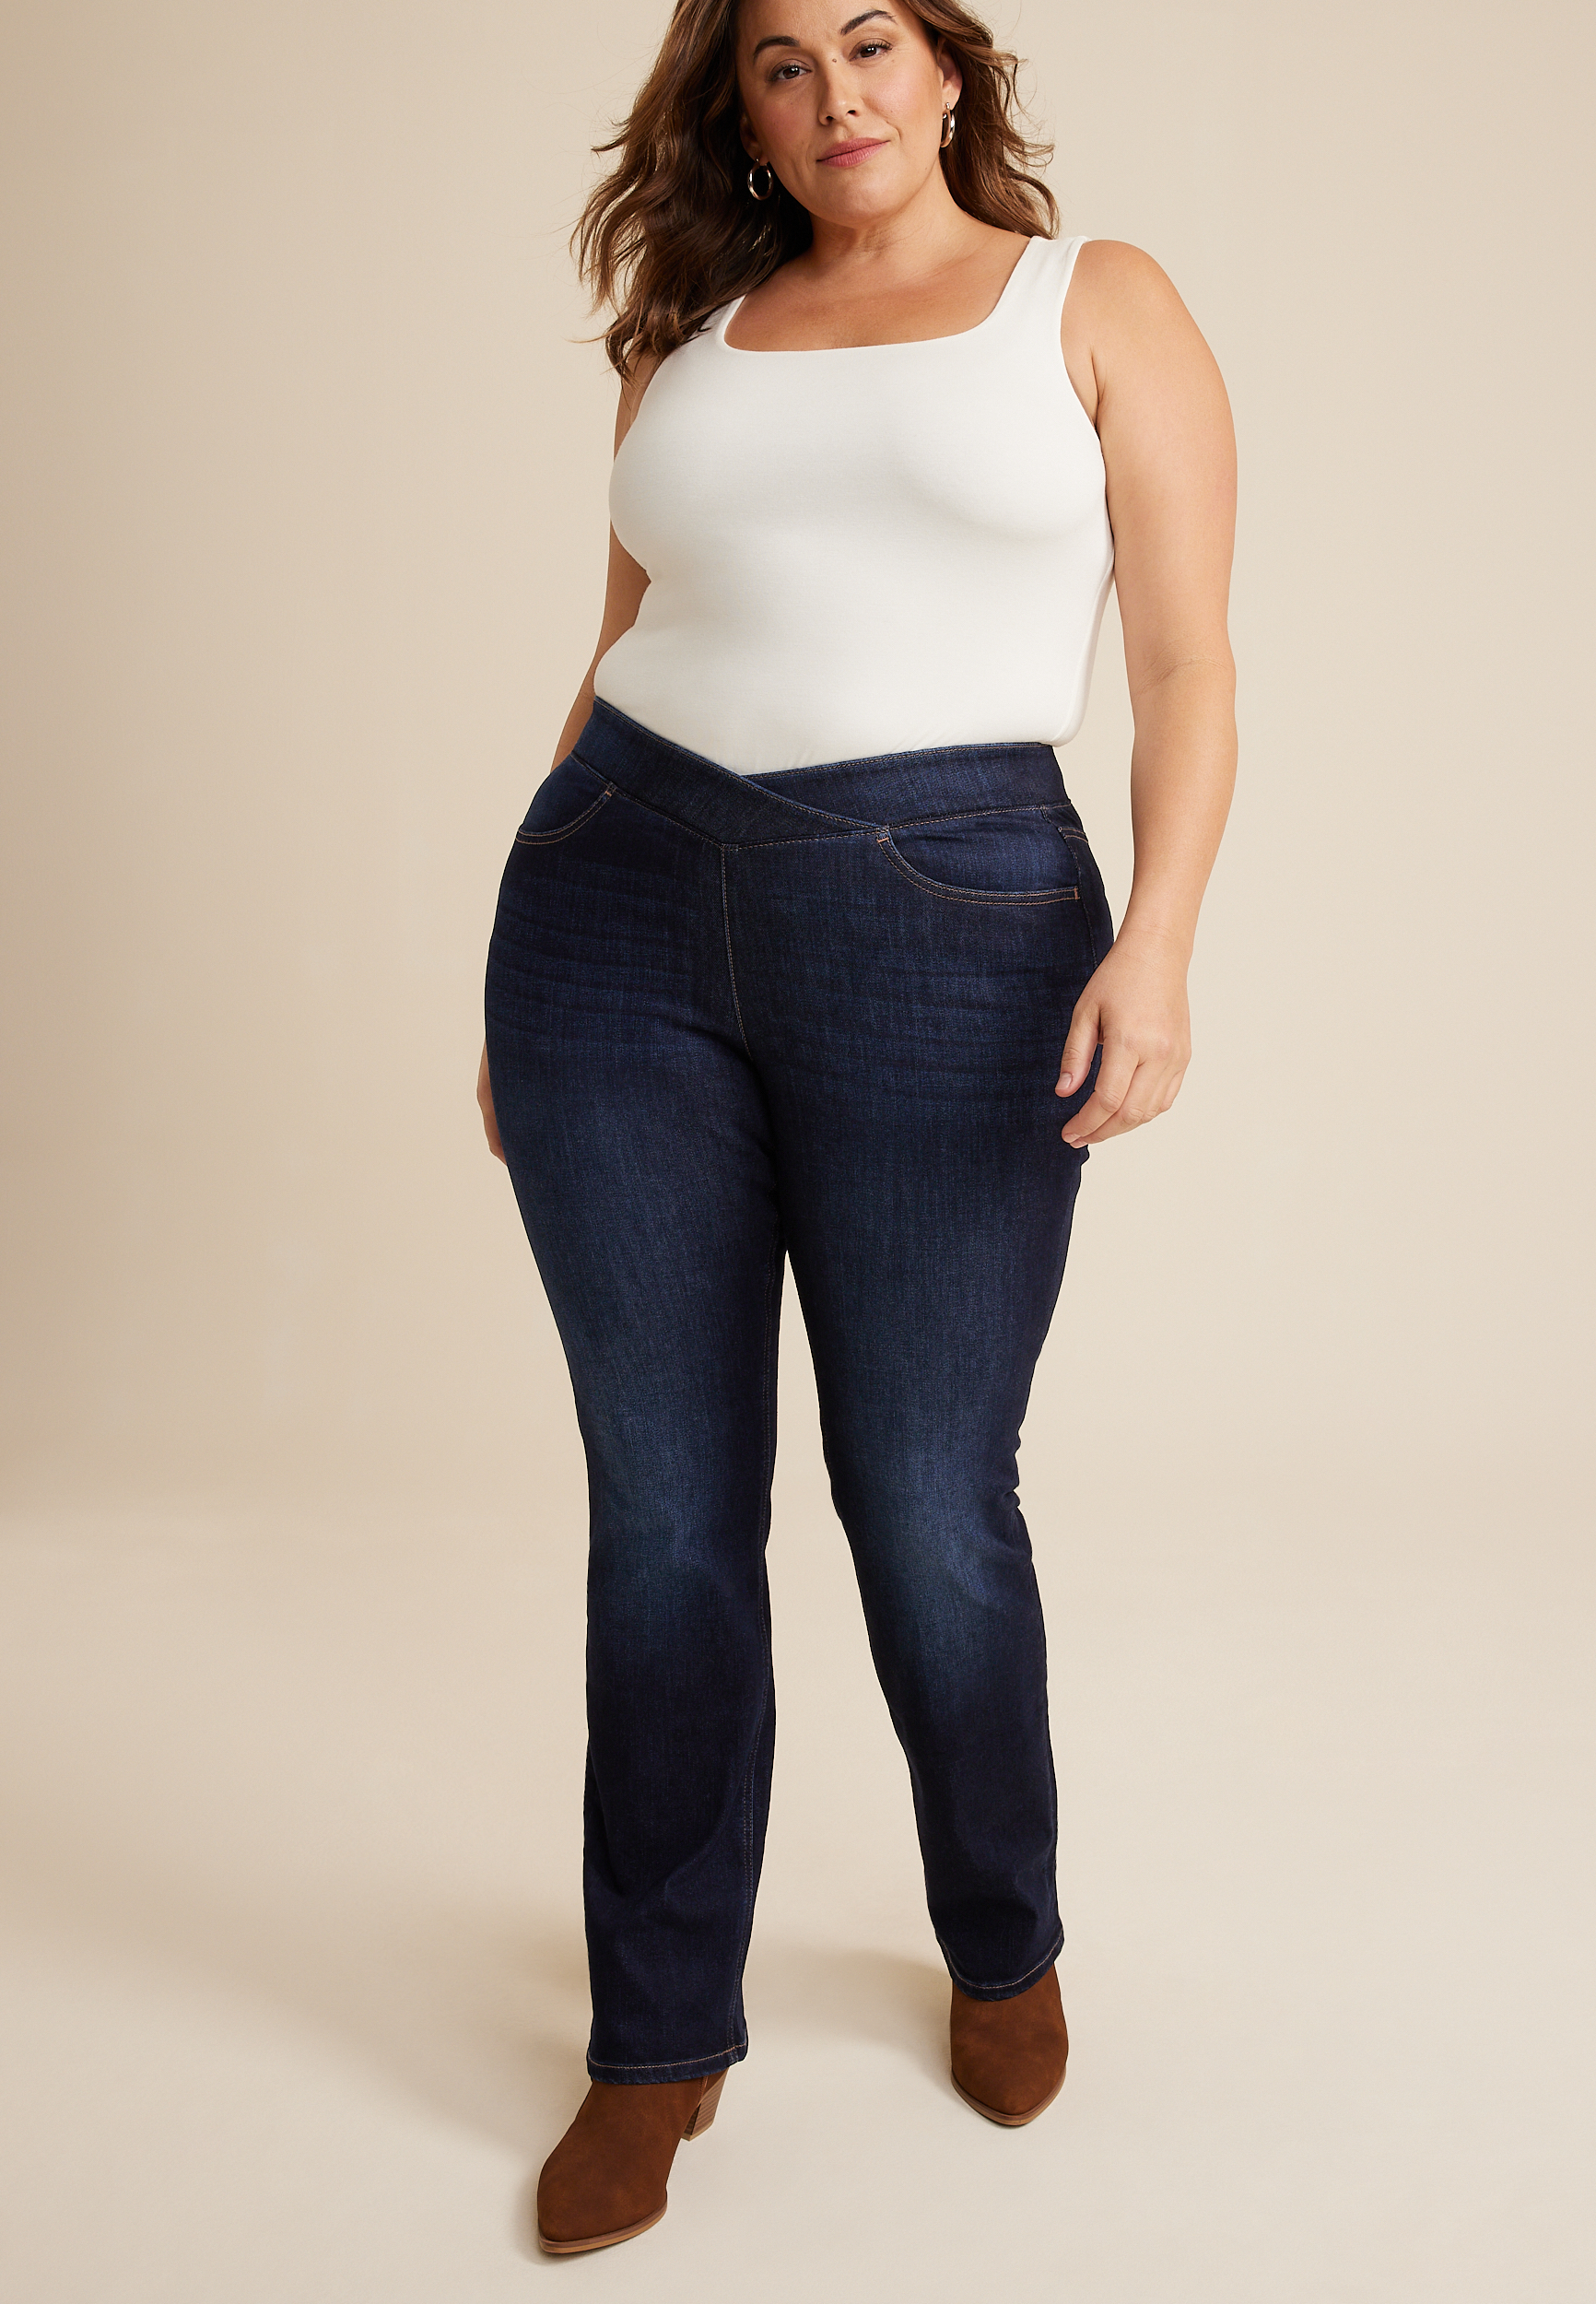 Plus Size m jeans by maurices™ Cool Comfort Crossover Pull On High